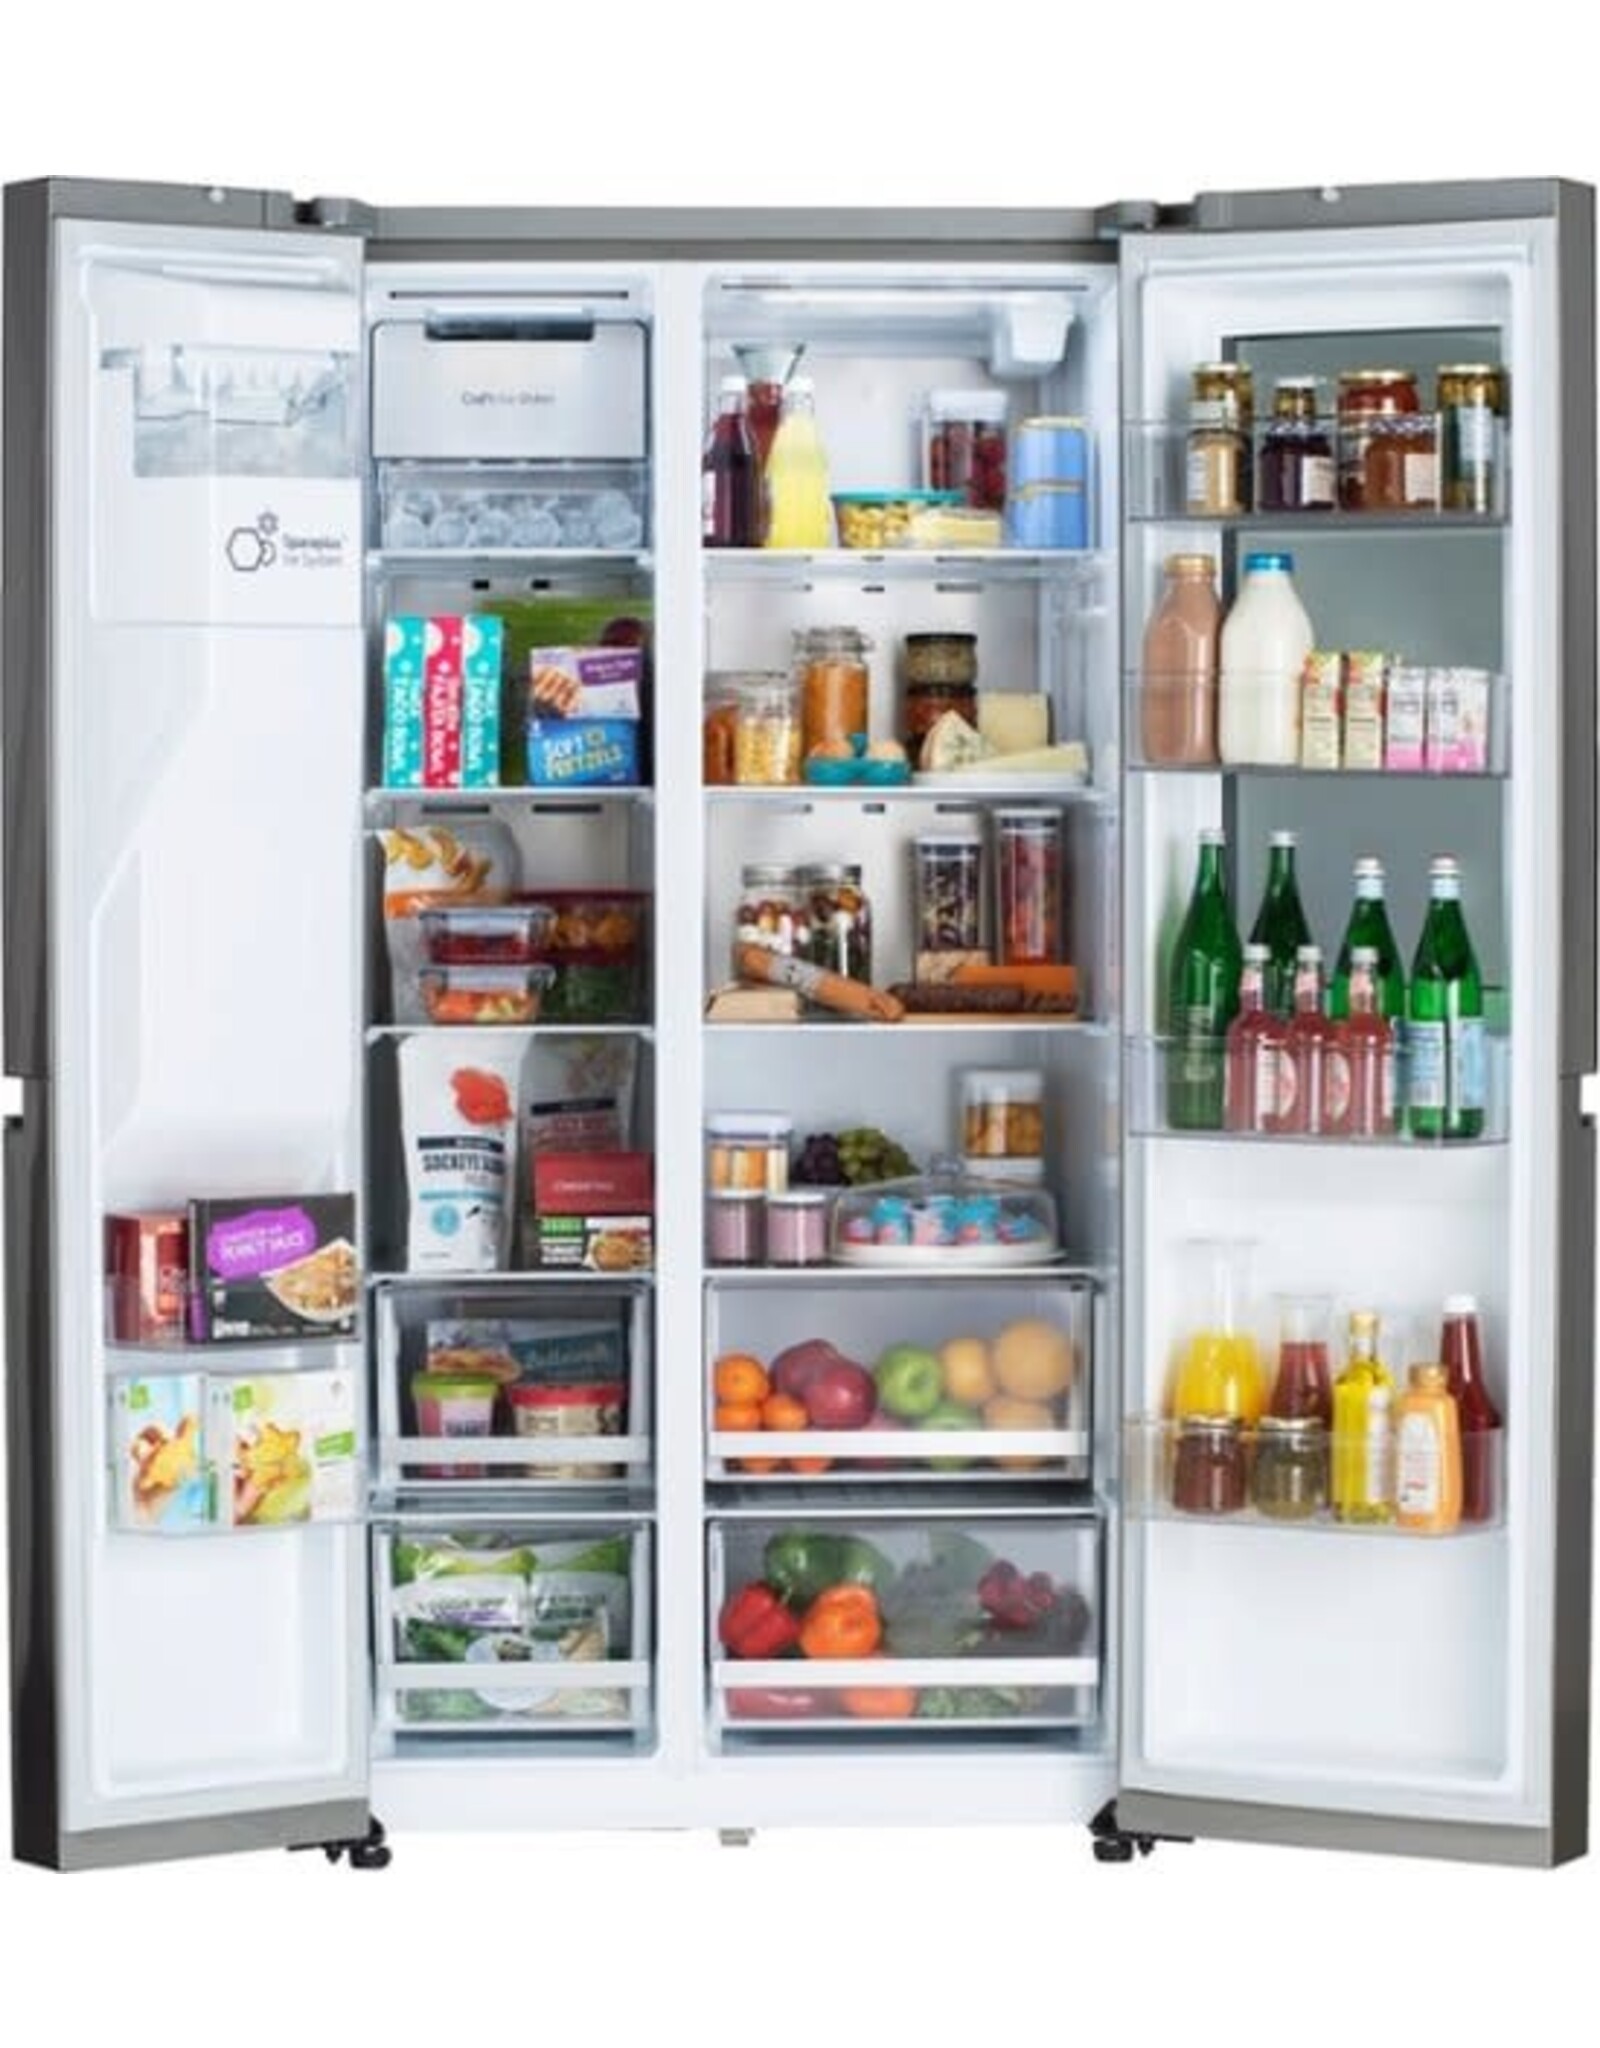 lg LG InstaView Craft Ice 27.1-cu ft Smart Side-by-Side Refrigerator with Dual Ice Maker (Printproof Stainless Steel) ENERGY STAR